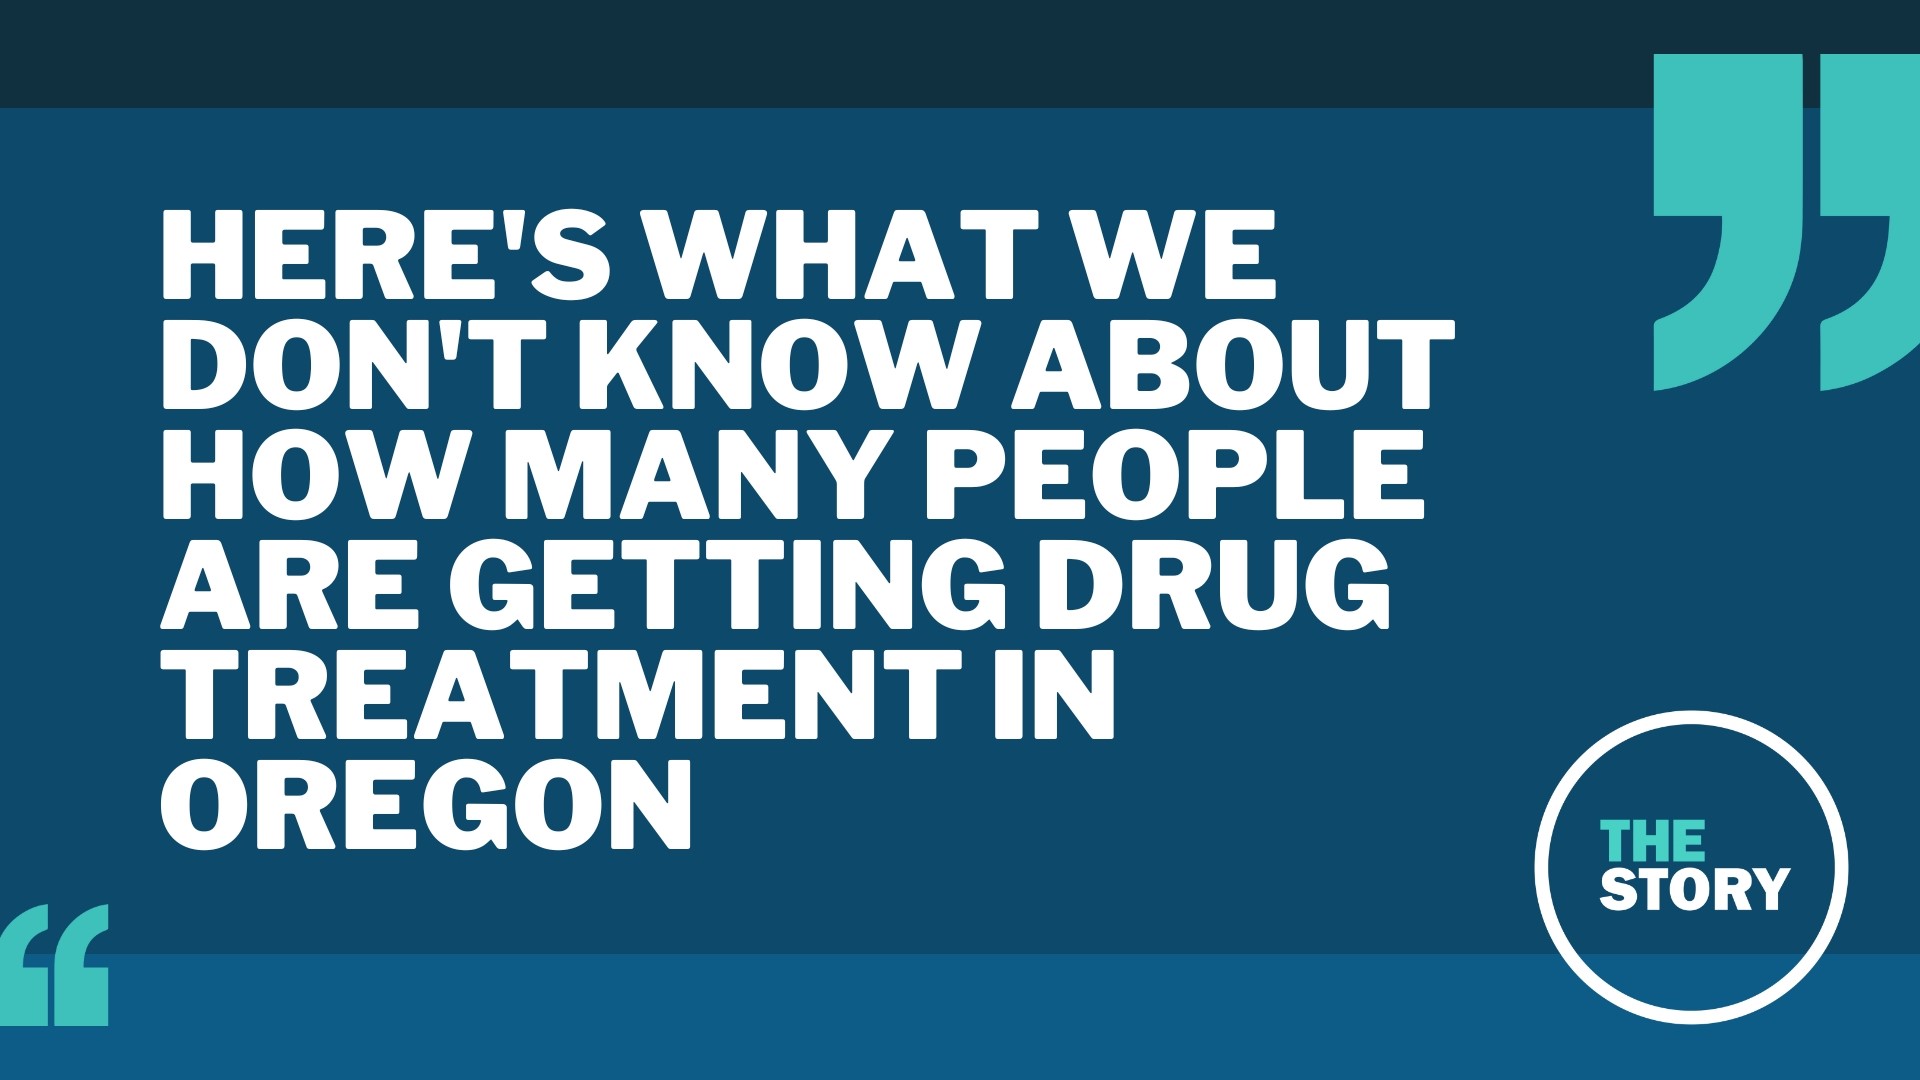 Last week, the OHA said the funding had already helped providers reach 60,000 people struggling with addiction in Oregon. But how did they get those numbers?